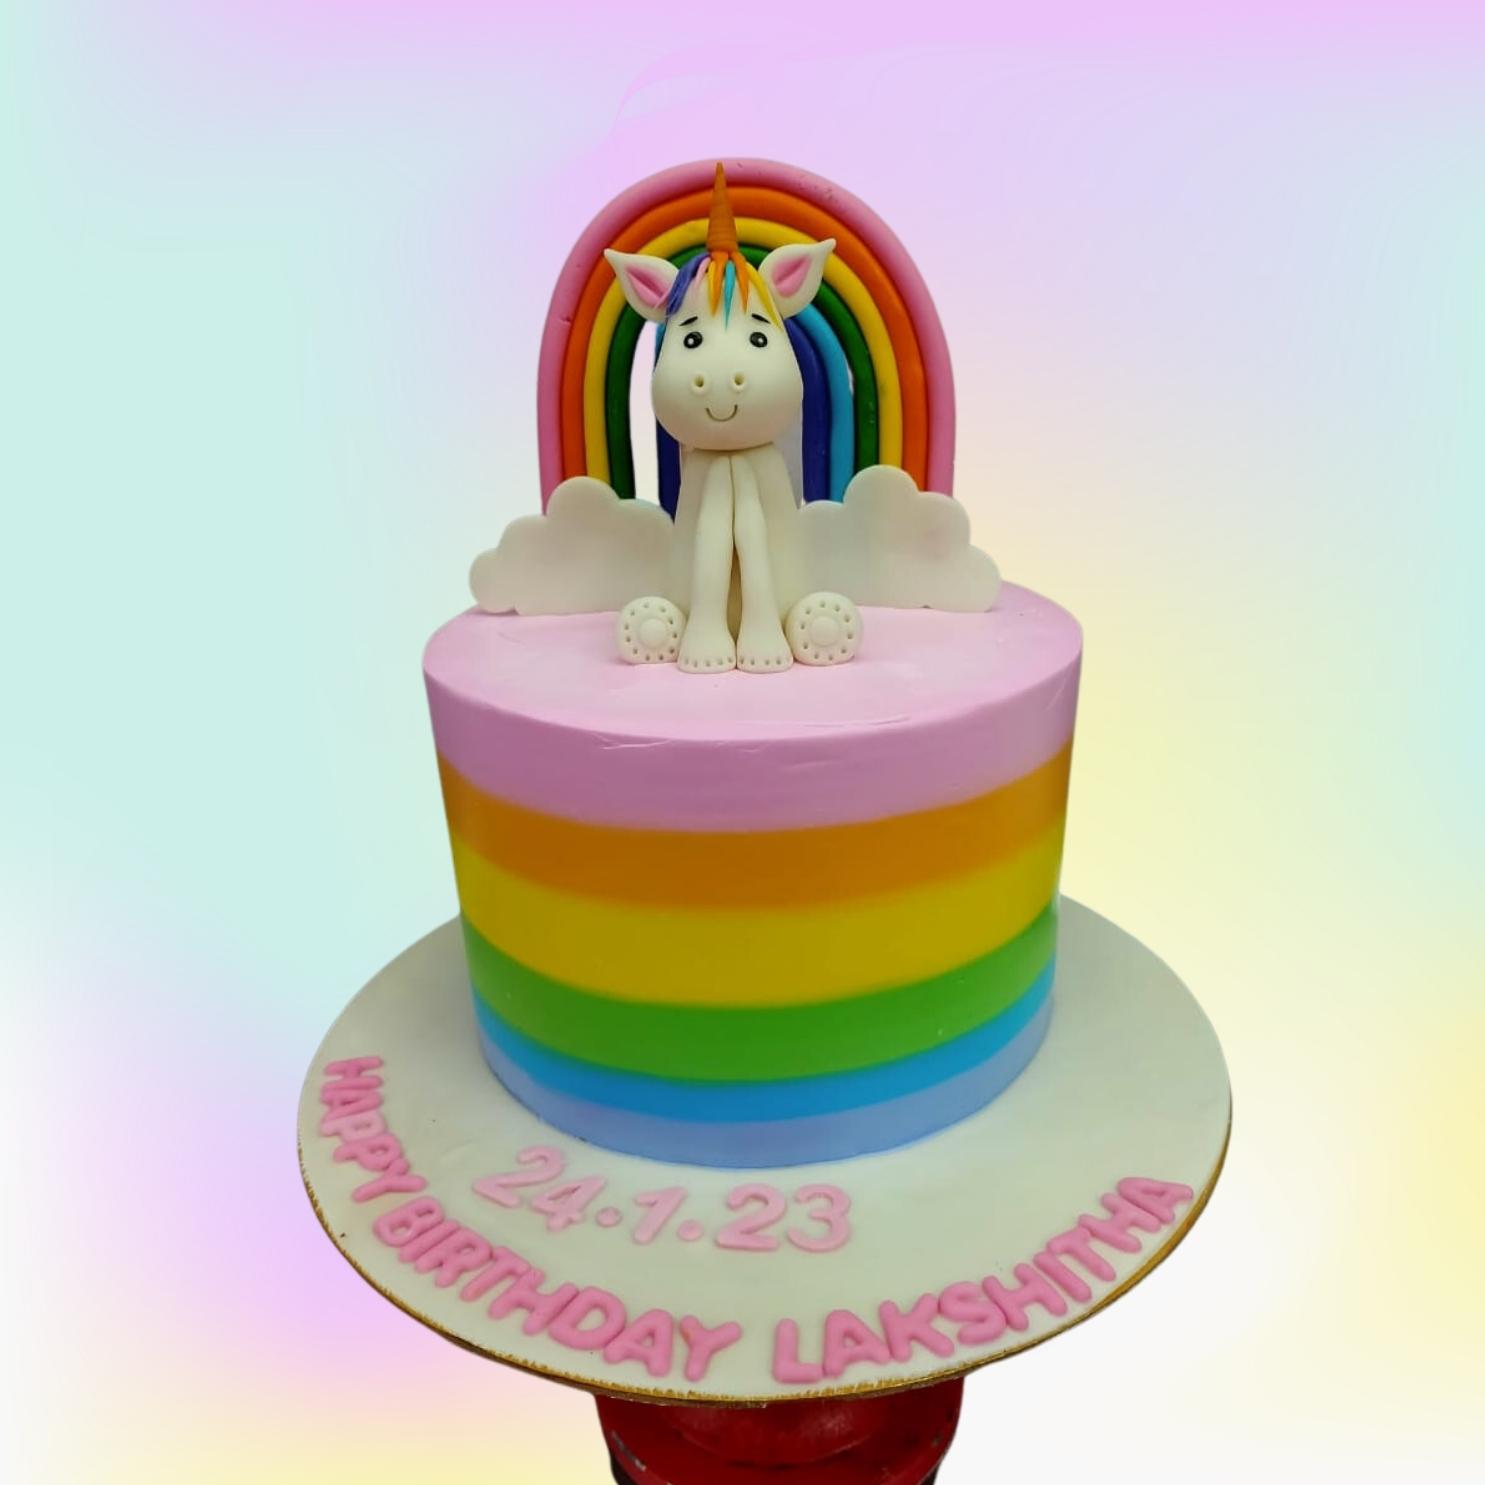 1 KG Fondant Cake Unicorn, Super Cake- Online Cake delivery in Noida, Cake  Shops with Midnight & Same Day Delivery